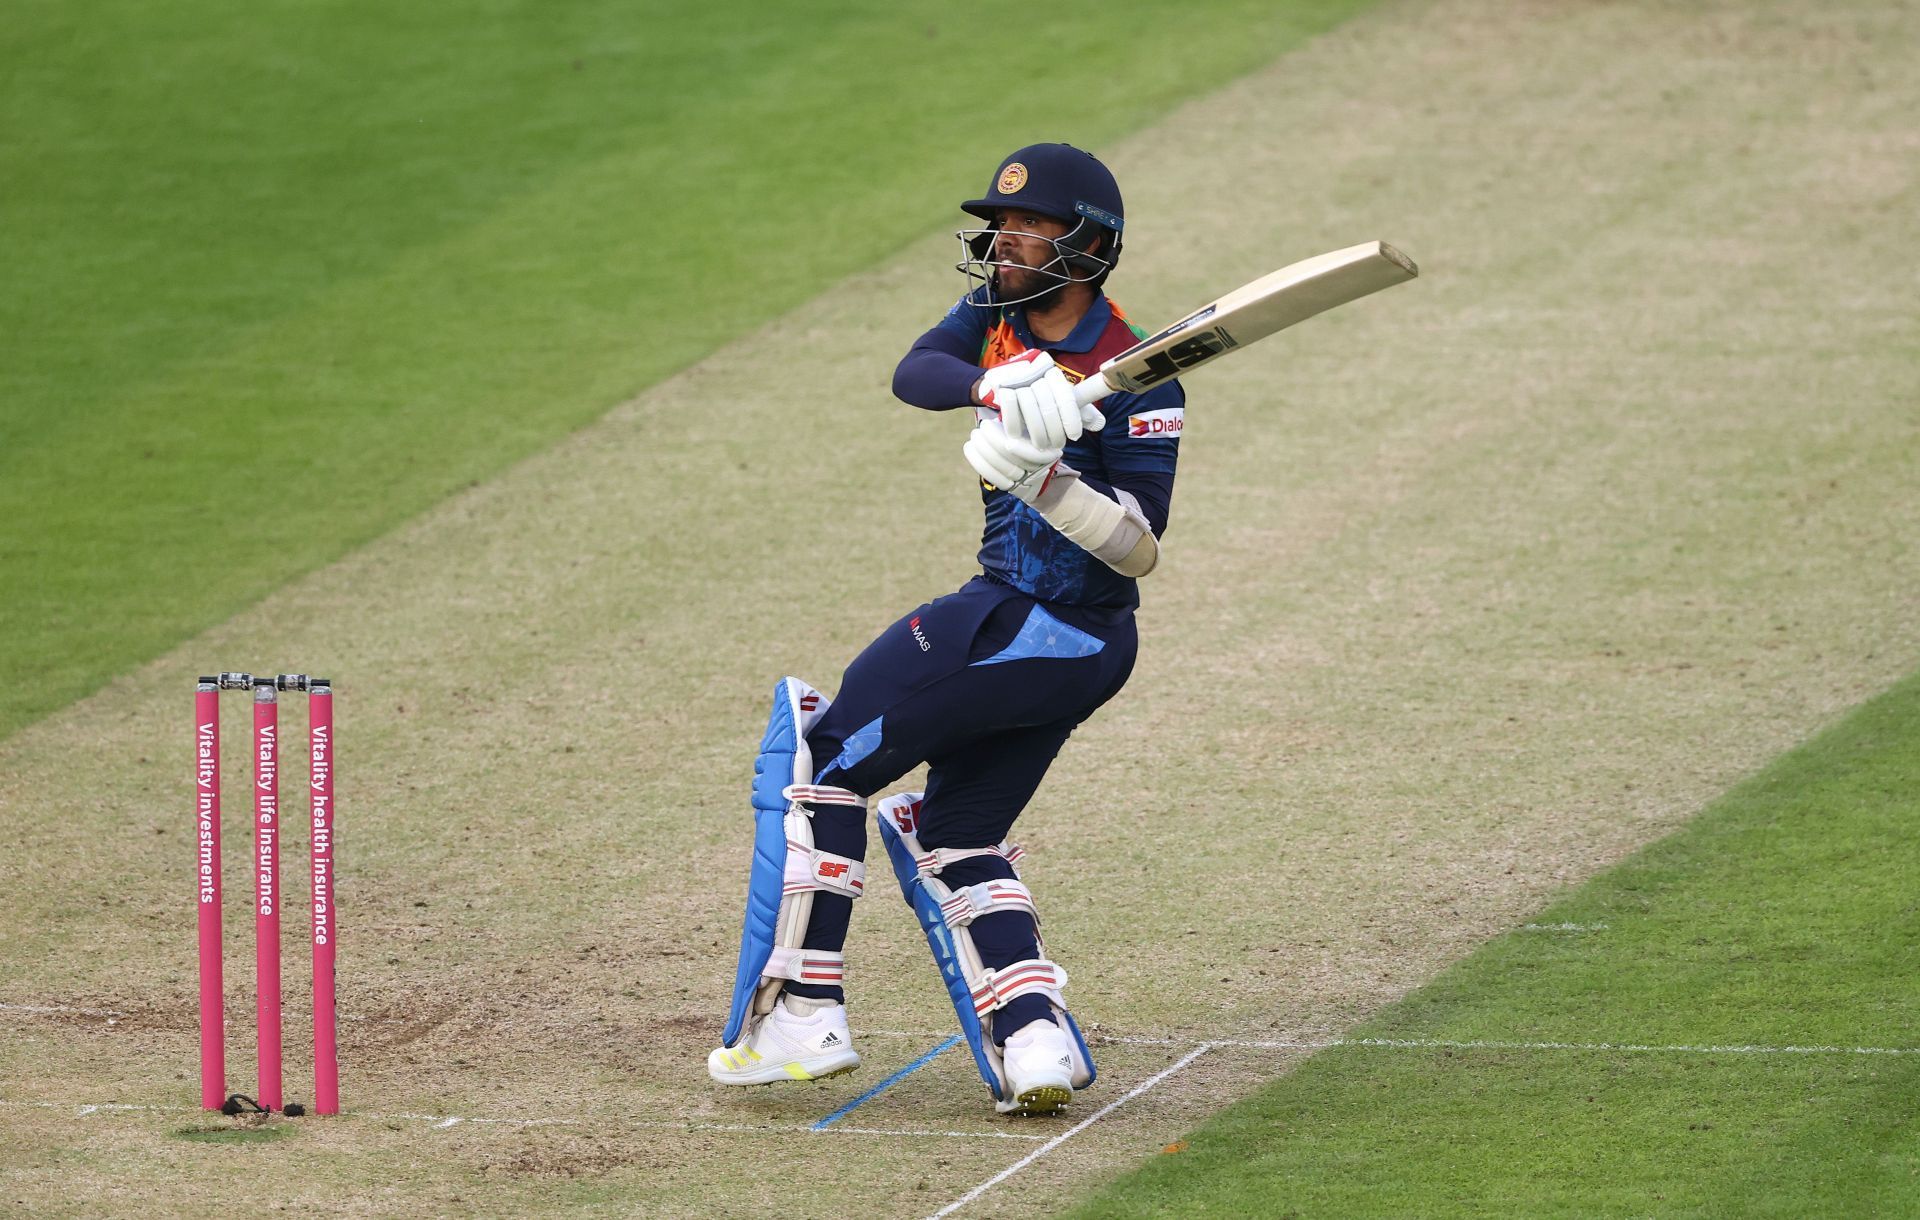 Kusal Mendis is the leading run-scorer in the competition.